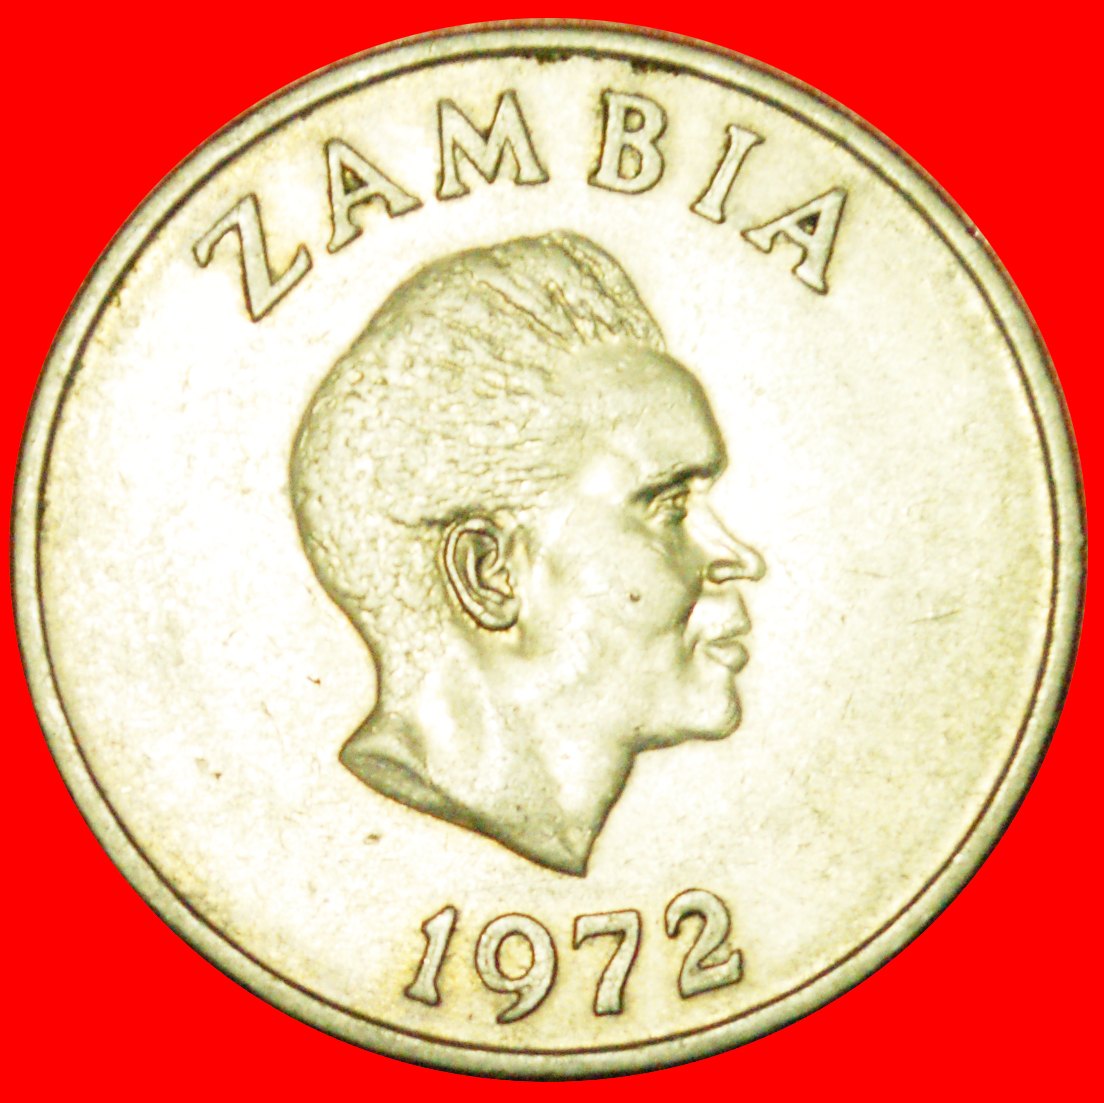  + GREAT BRITAIN: ZAMBIA ★ 20 NGWEE 1972! LOW START ★ NO RESERVE!   